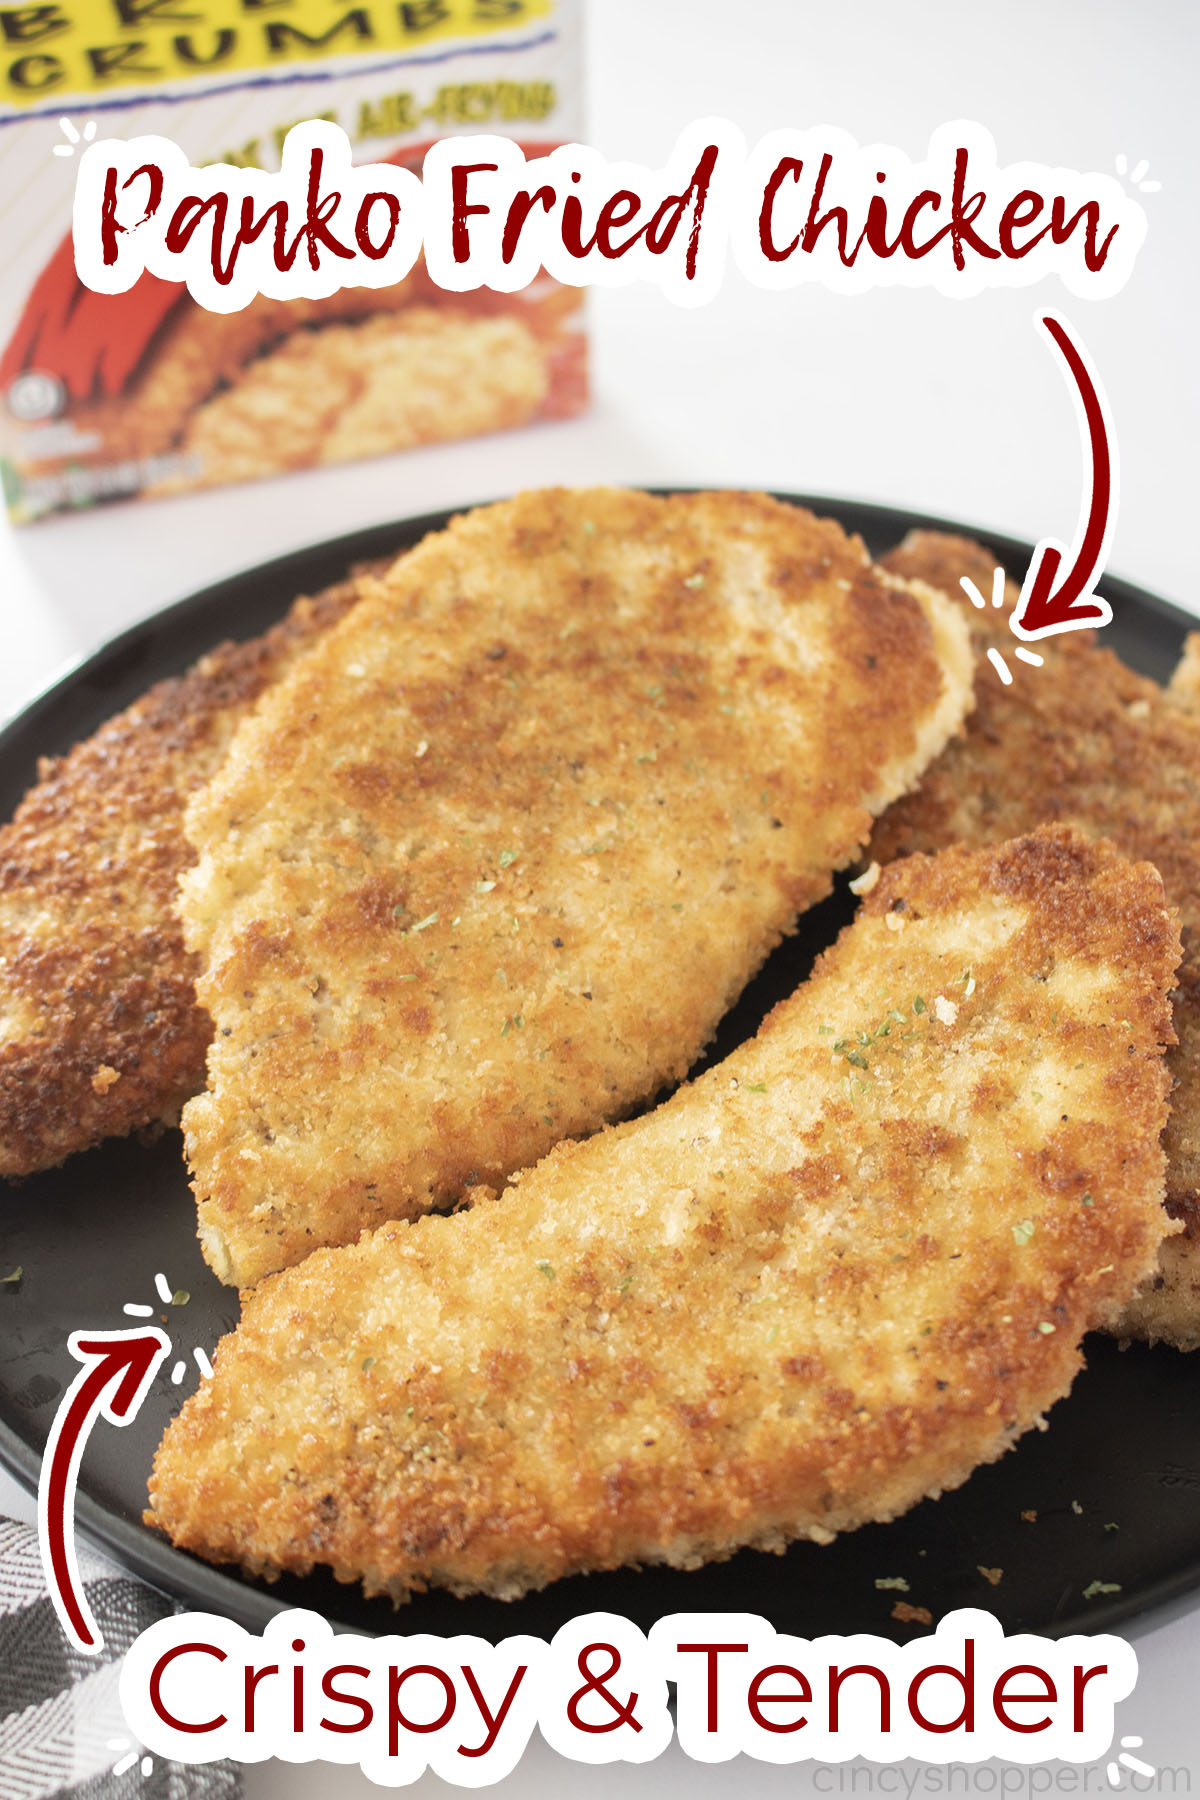 Text on image Panko Fried Chicken Crispy and Tender.